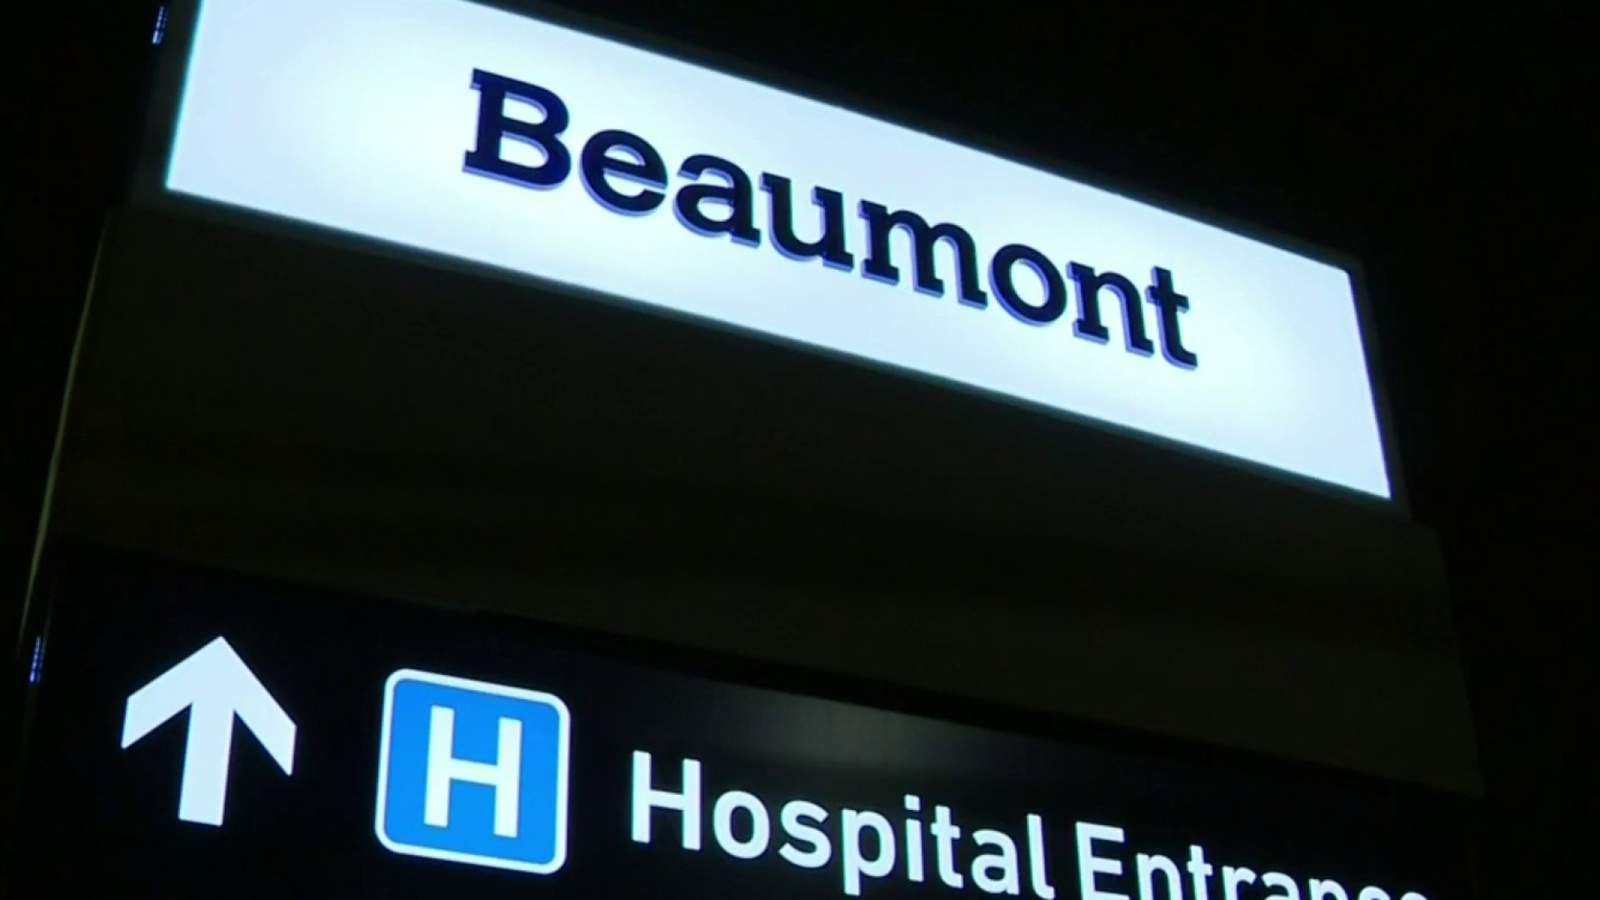 Beaumont, staffing agencies sued for allegedly neglecting to investigate sexual harassment by hospital executive